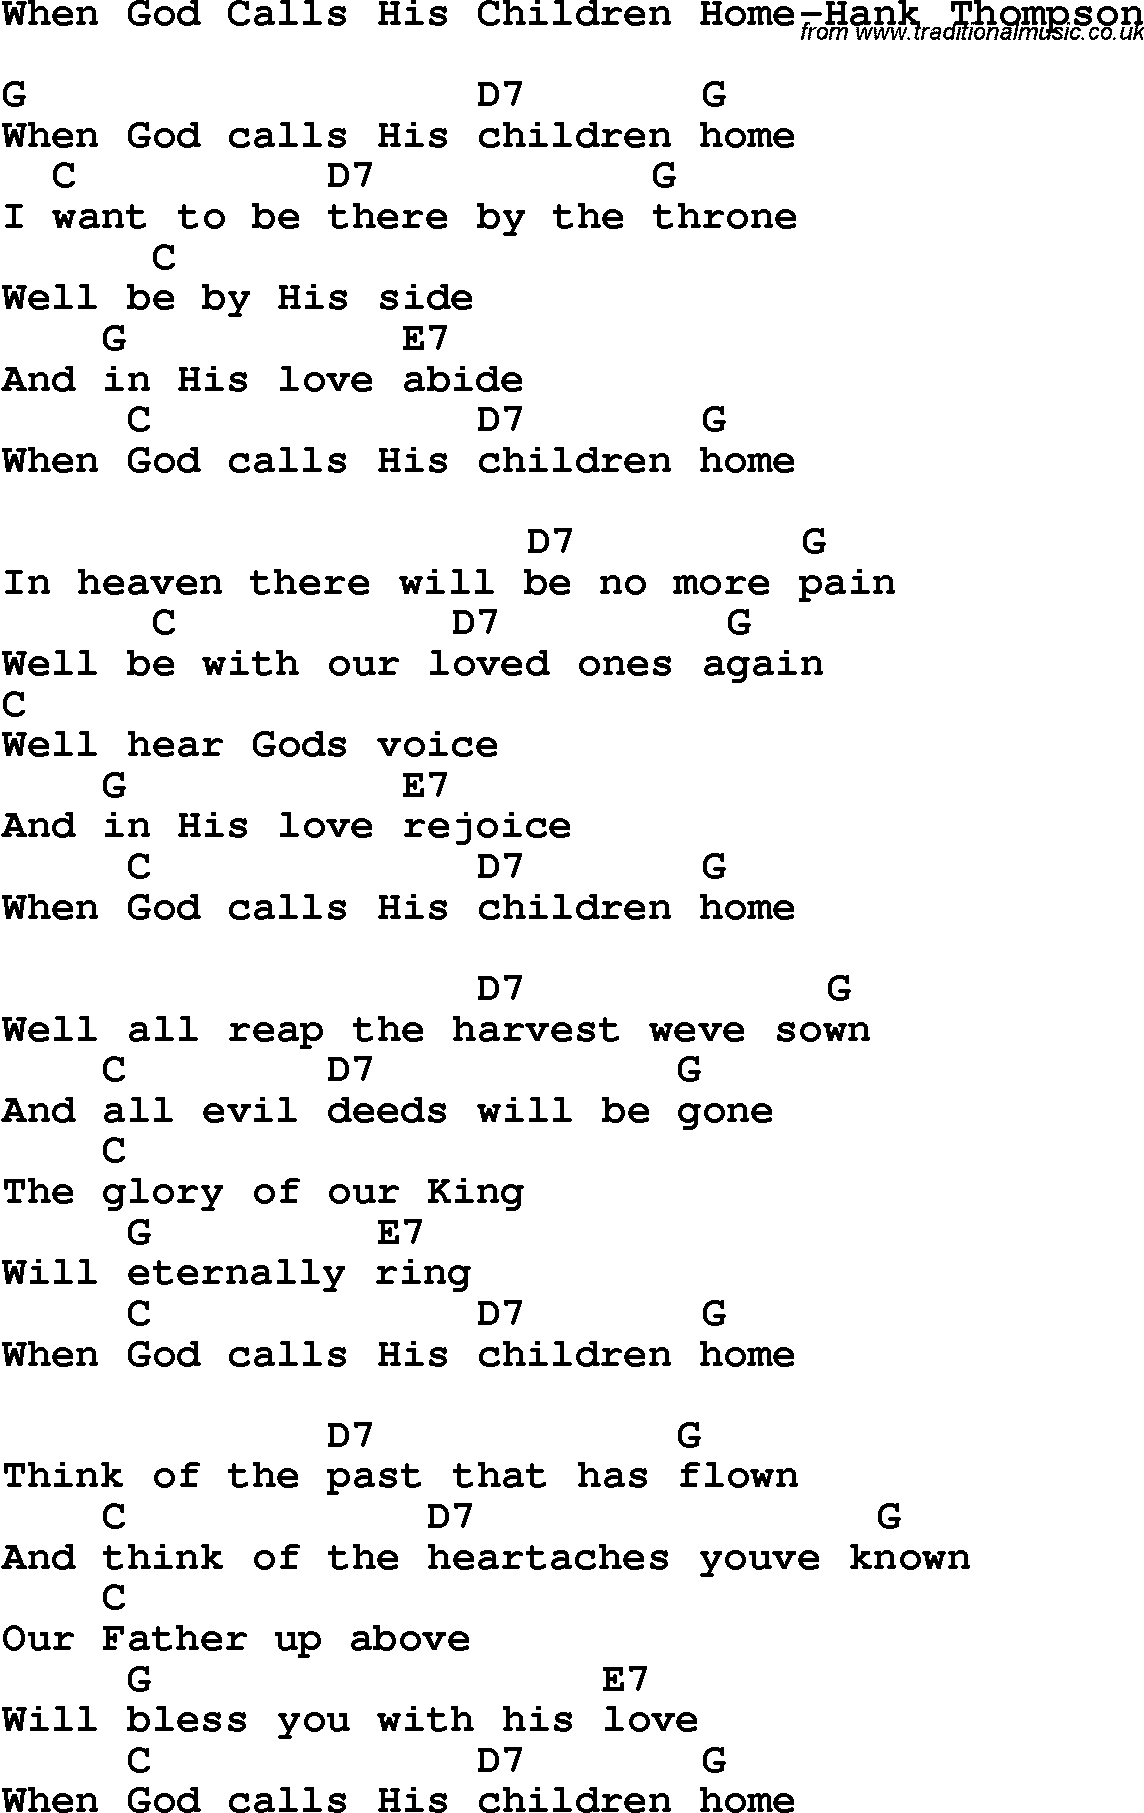 Country, Southern and Bluegrass Gospel Song When God Calls His Children Home-Hank Thompson lyrics and chords